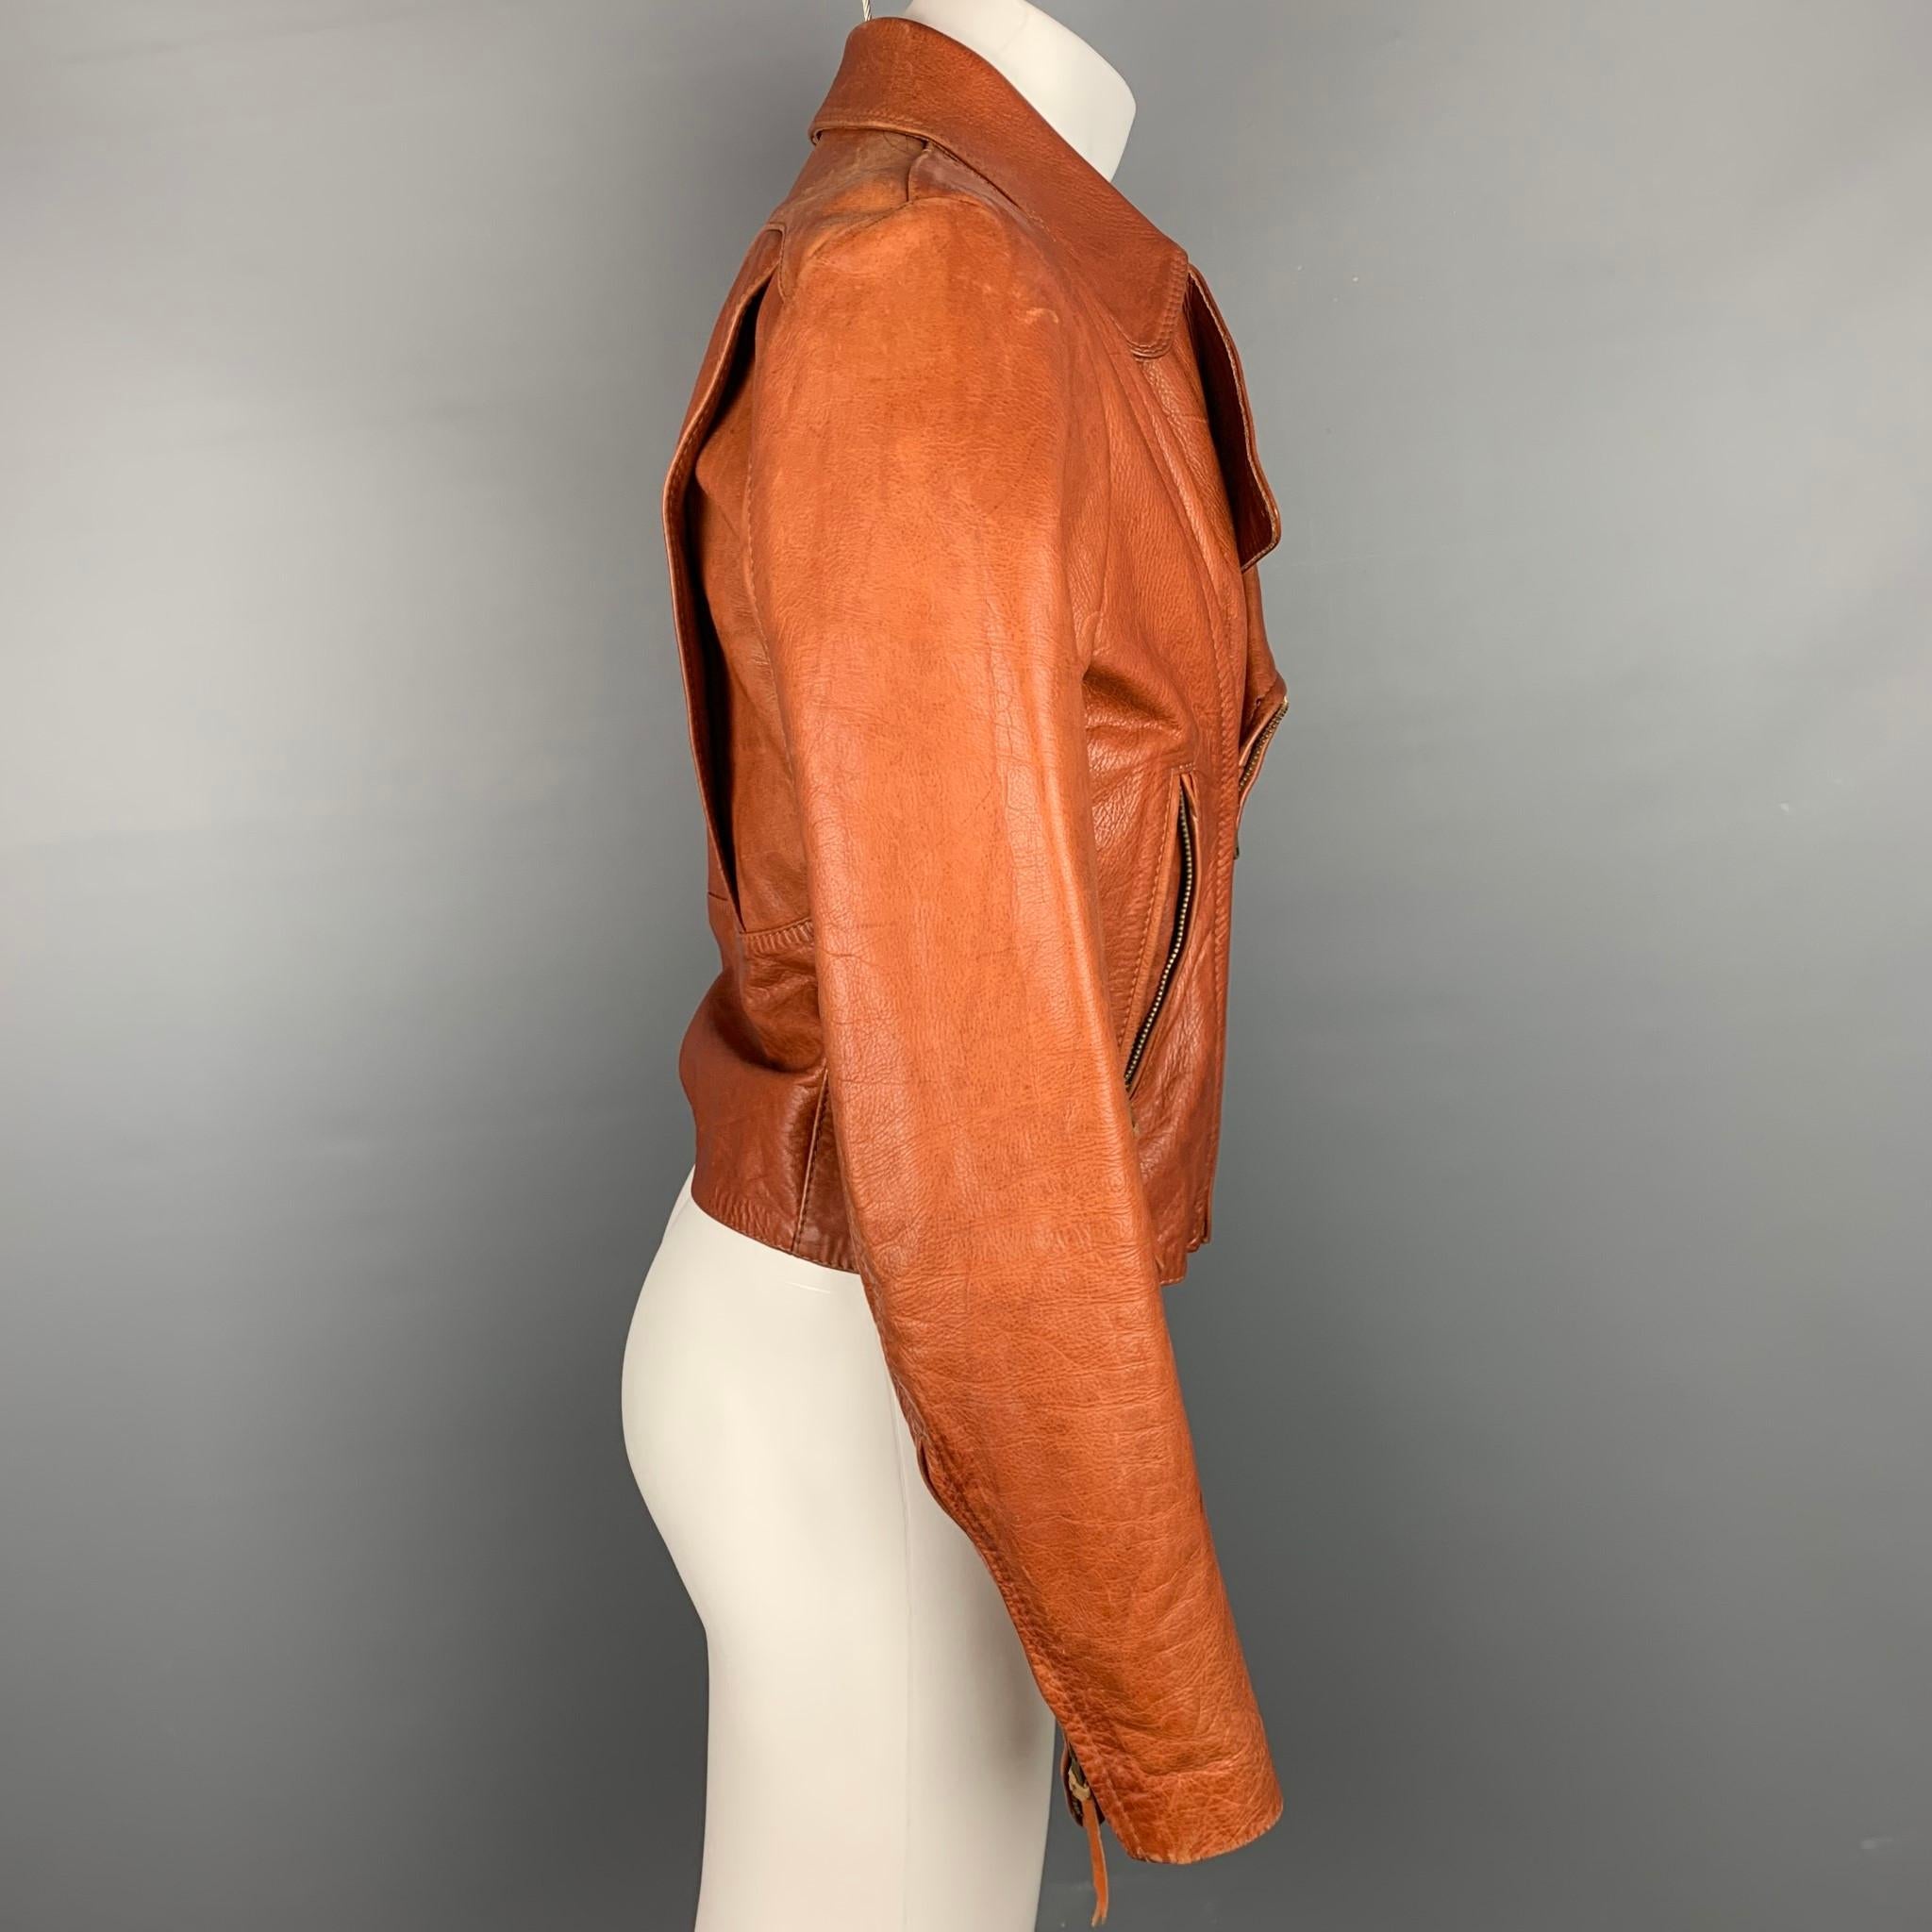 Vintage 70's GLASSWATER jacket comes in a cognac leather with a full liner featuring a motorcycle style, notch lapel, zipper pockets, and a zip up closure. Minor wear. As-Is.

Good Pre-Owned Condition.
Marked: No size